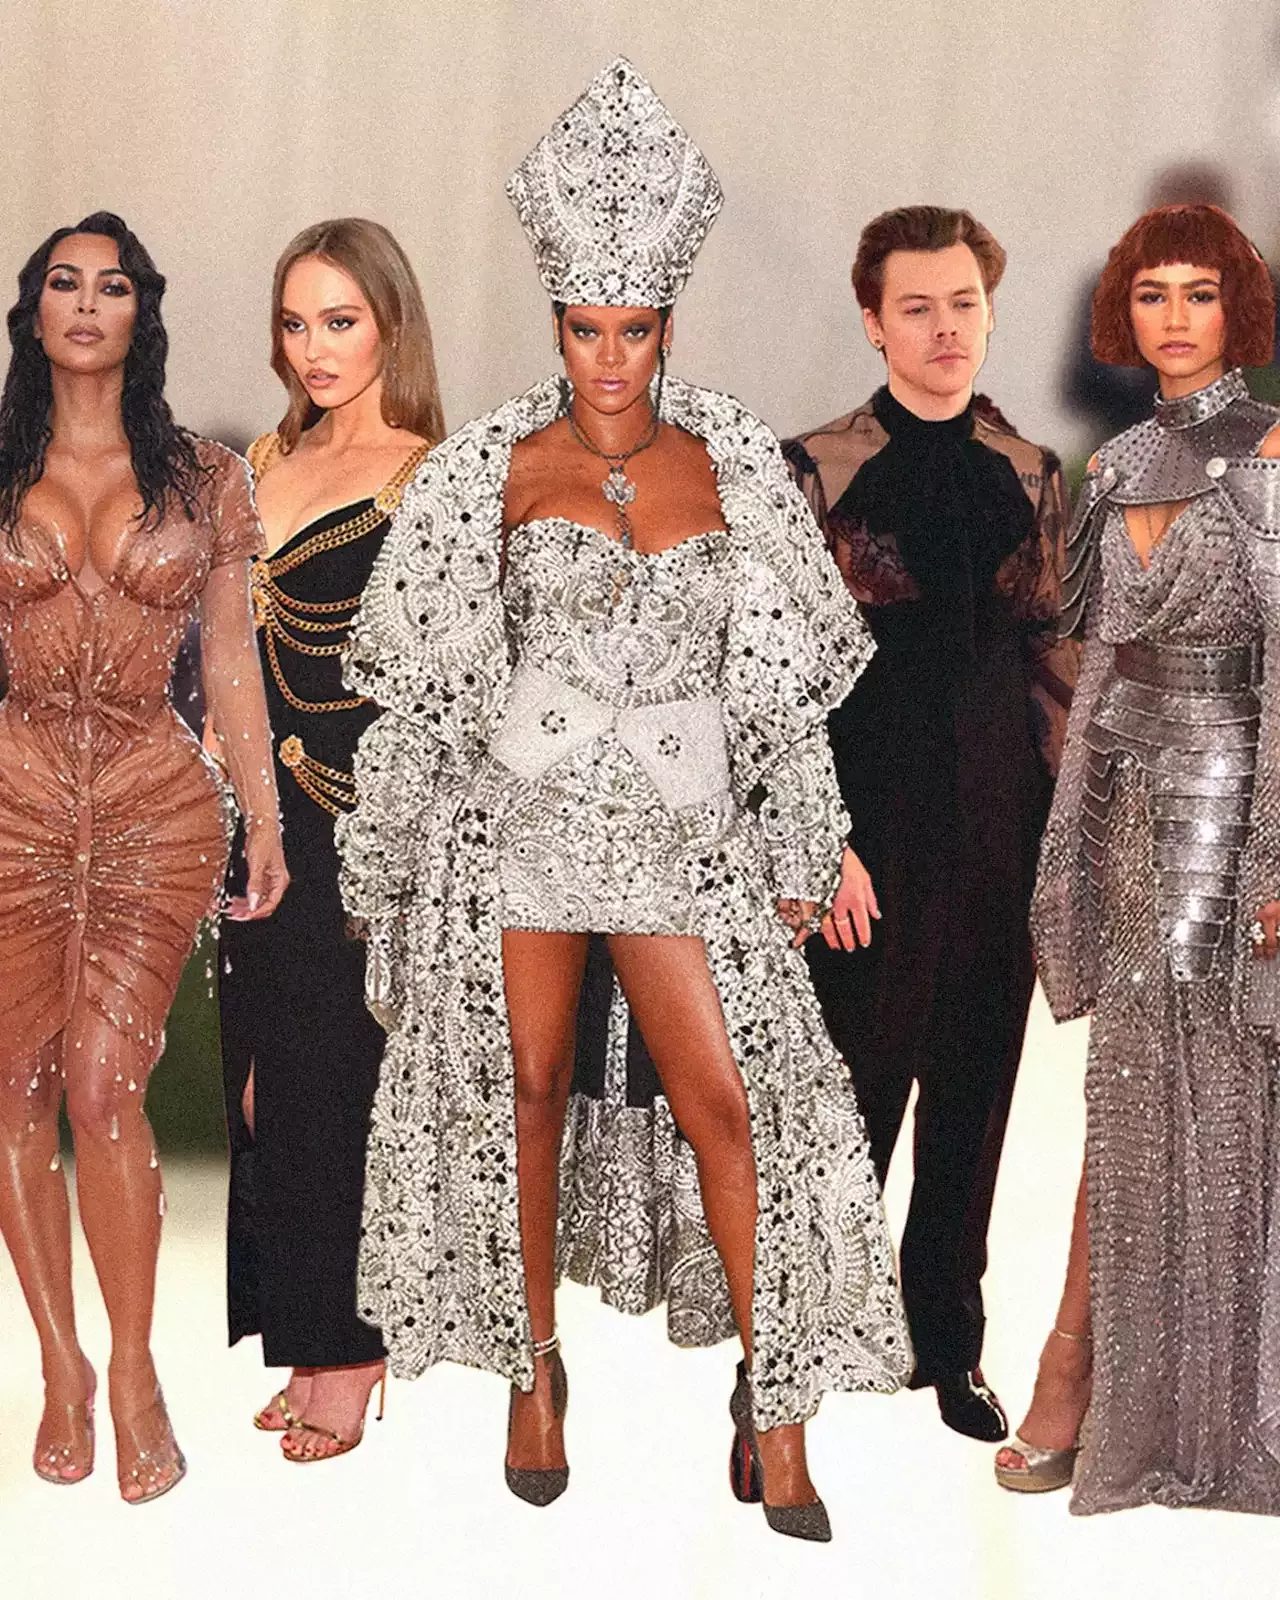 What is the best Met Gala look of all time? - Quora